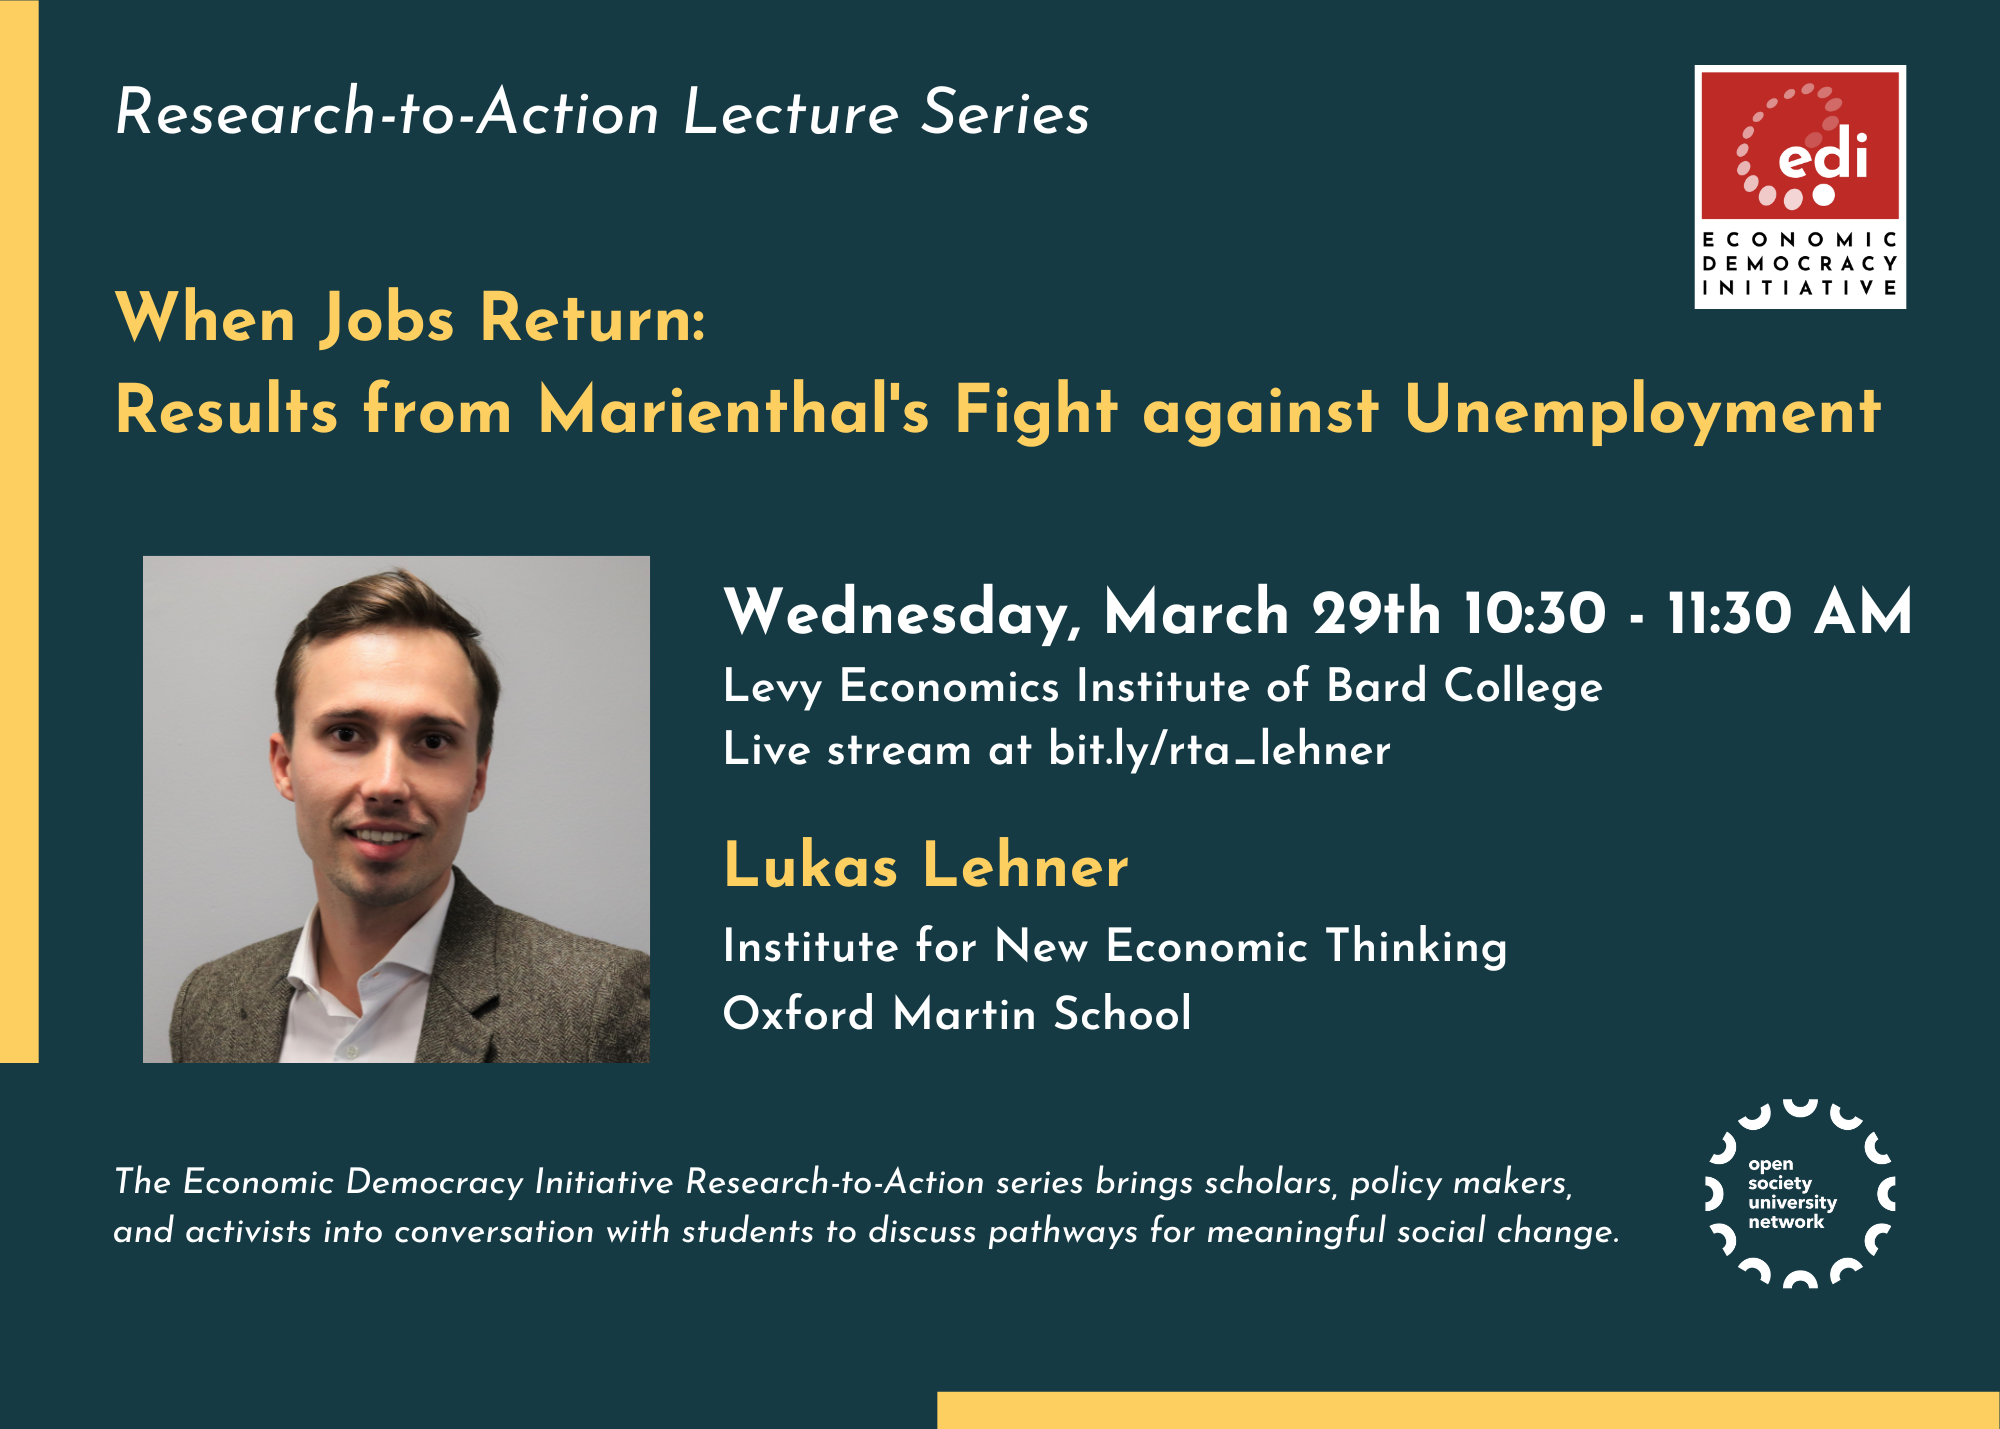 When Jobs Return: Results from Marienthal's Fight against Unemployment with Lukas Lehner